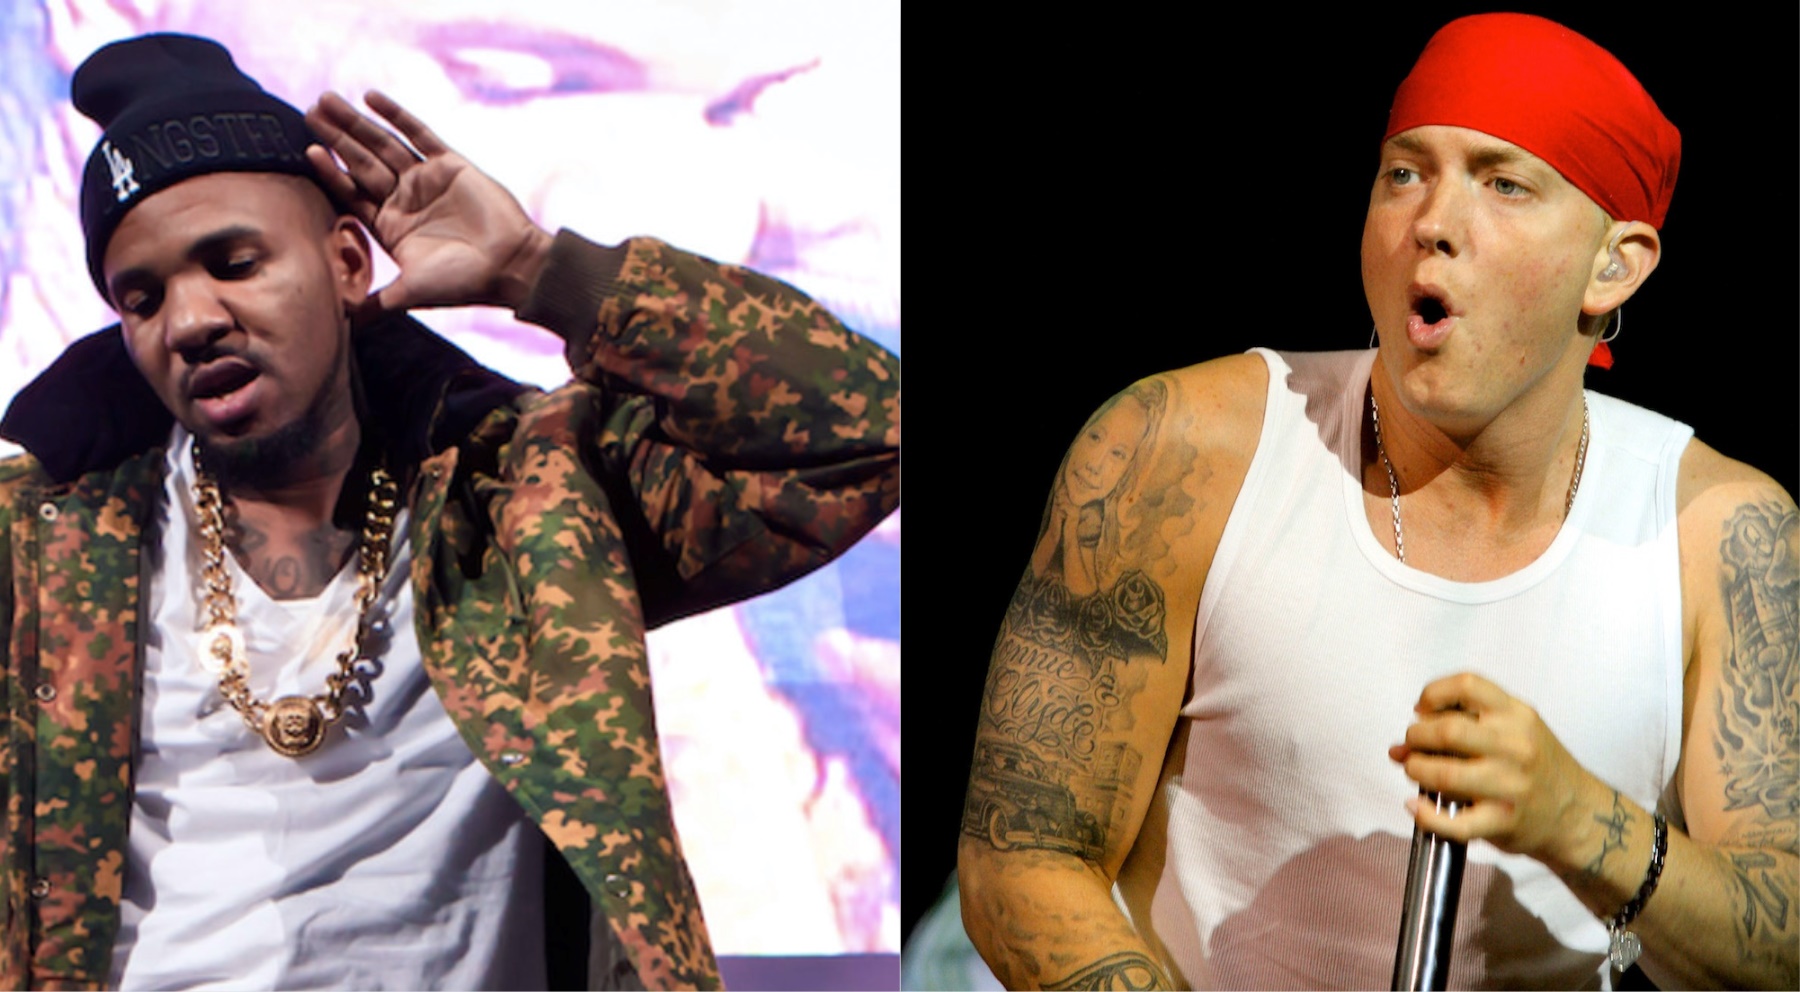 The Game Wants Smoke With Eminem Eminem.Pro the biggest and most